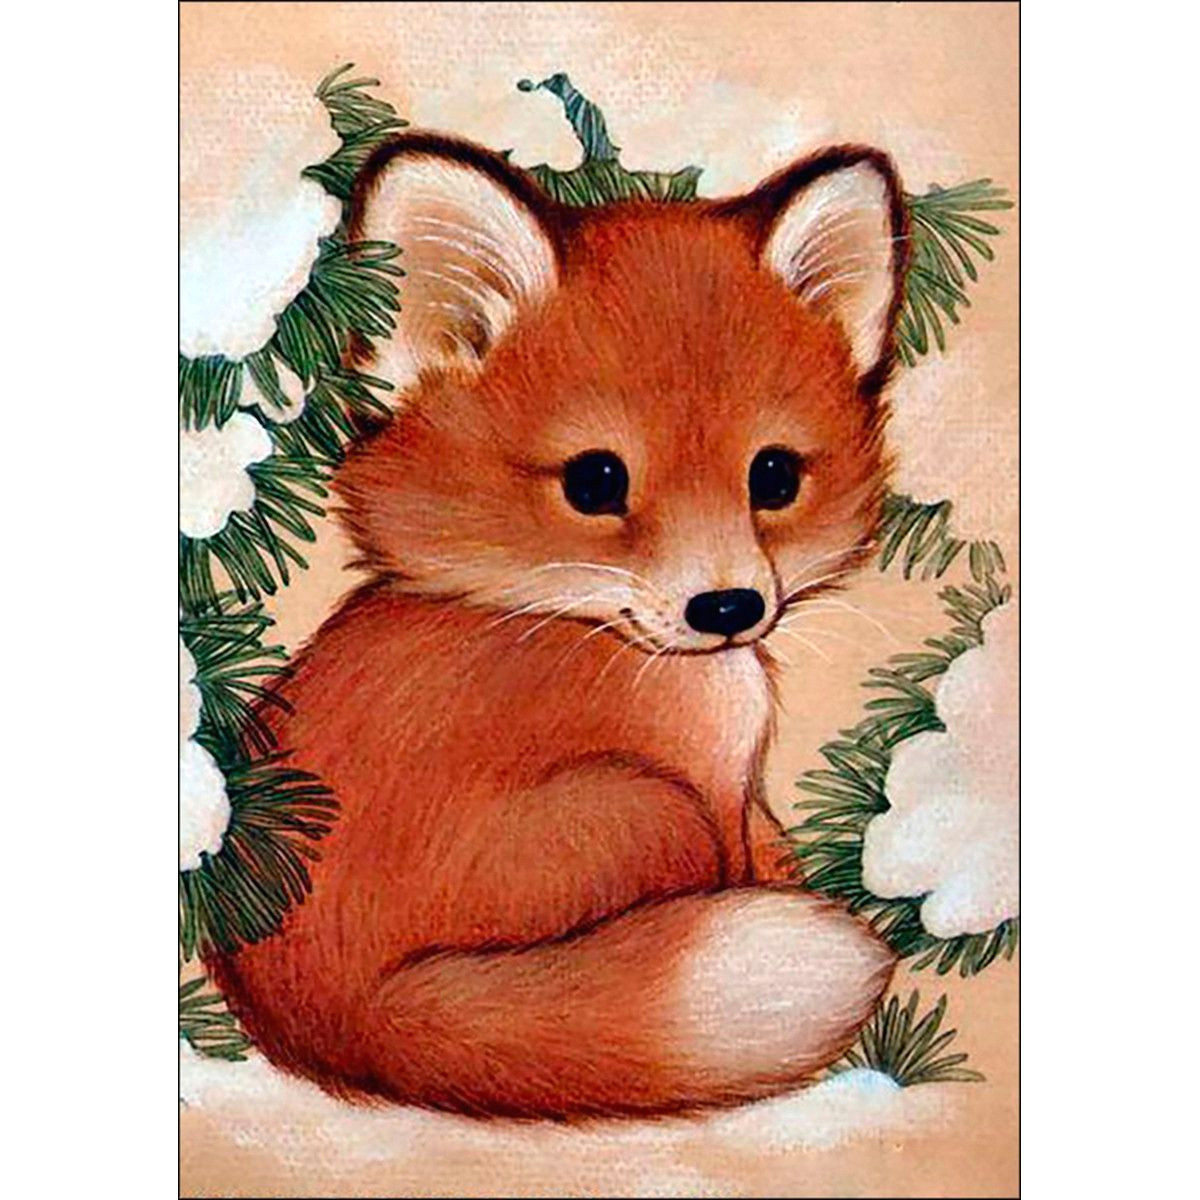 Cute Drawing Of A Fox Diamond Embroidery Printed Gem Kit Fox Pup Drawing Pinterest